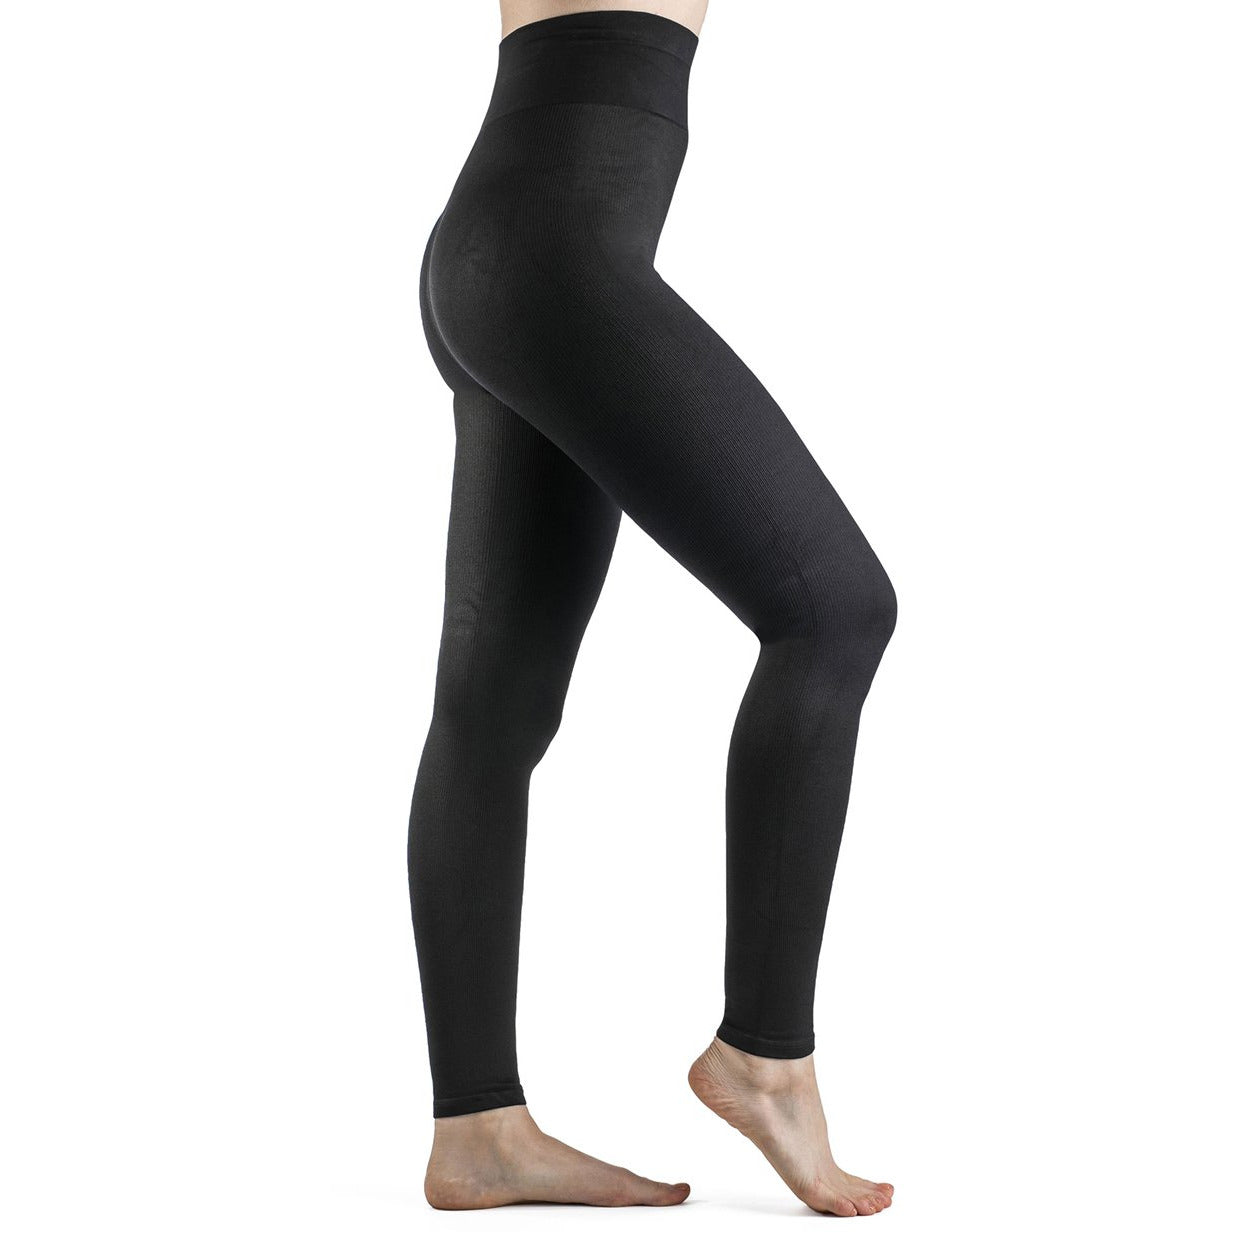 SOUL LEGS Black Opaque Compression Tights (Very Firm & Strong) 20 - 30mmHG